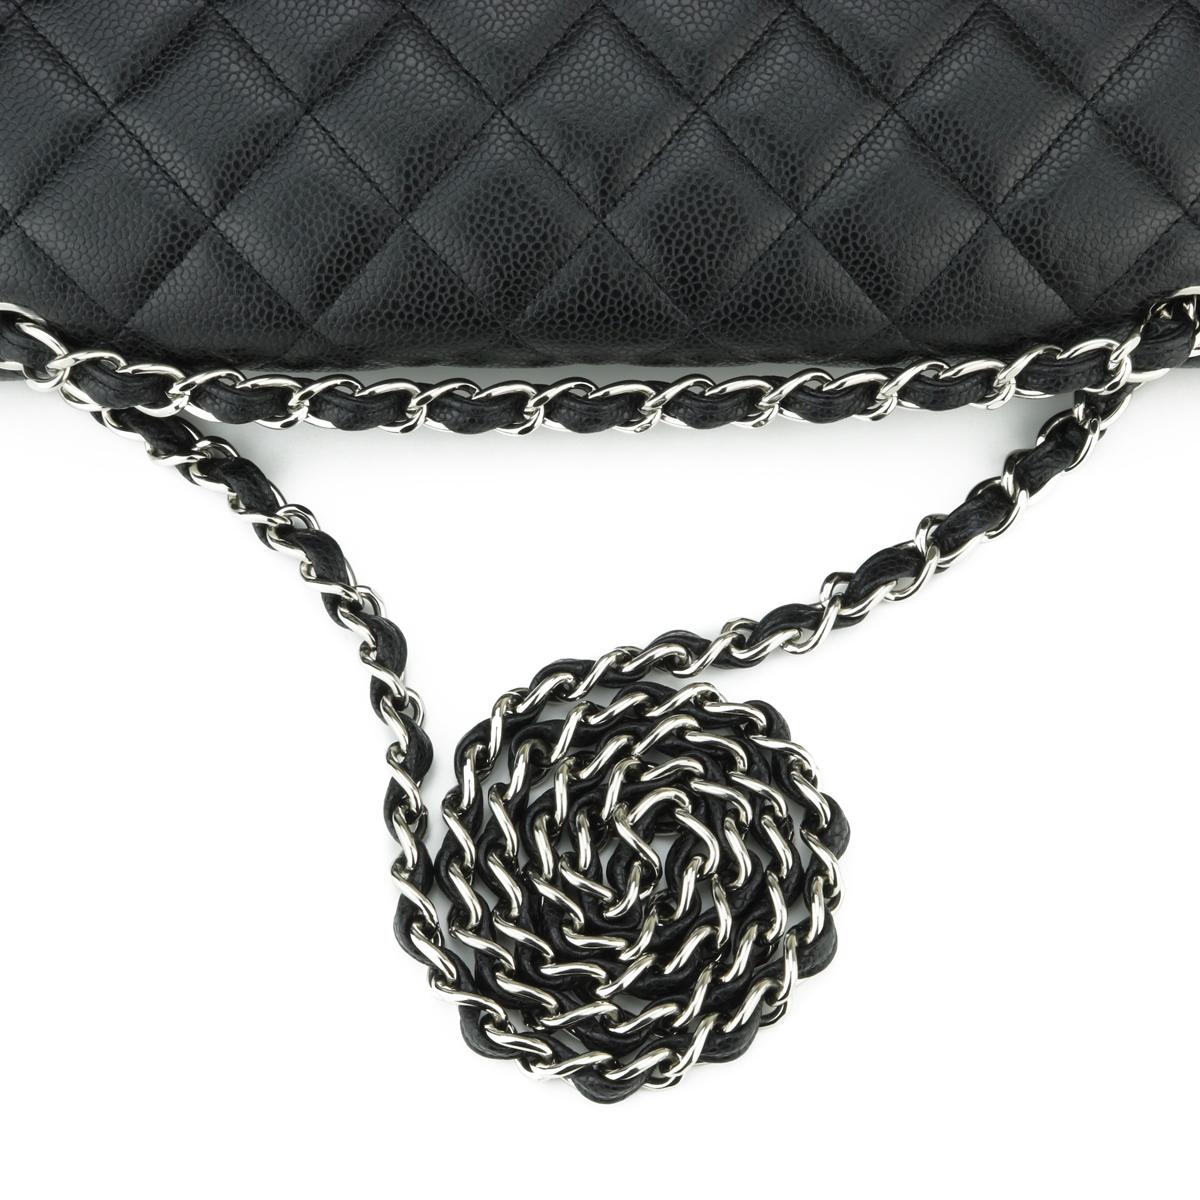 CHANEL Double Flap Maxi Bag Black Caviar with Silver Hardware 2014 For Sale 6